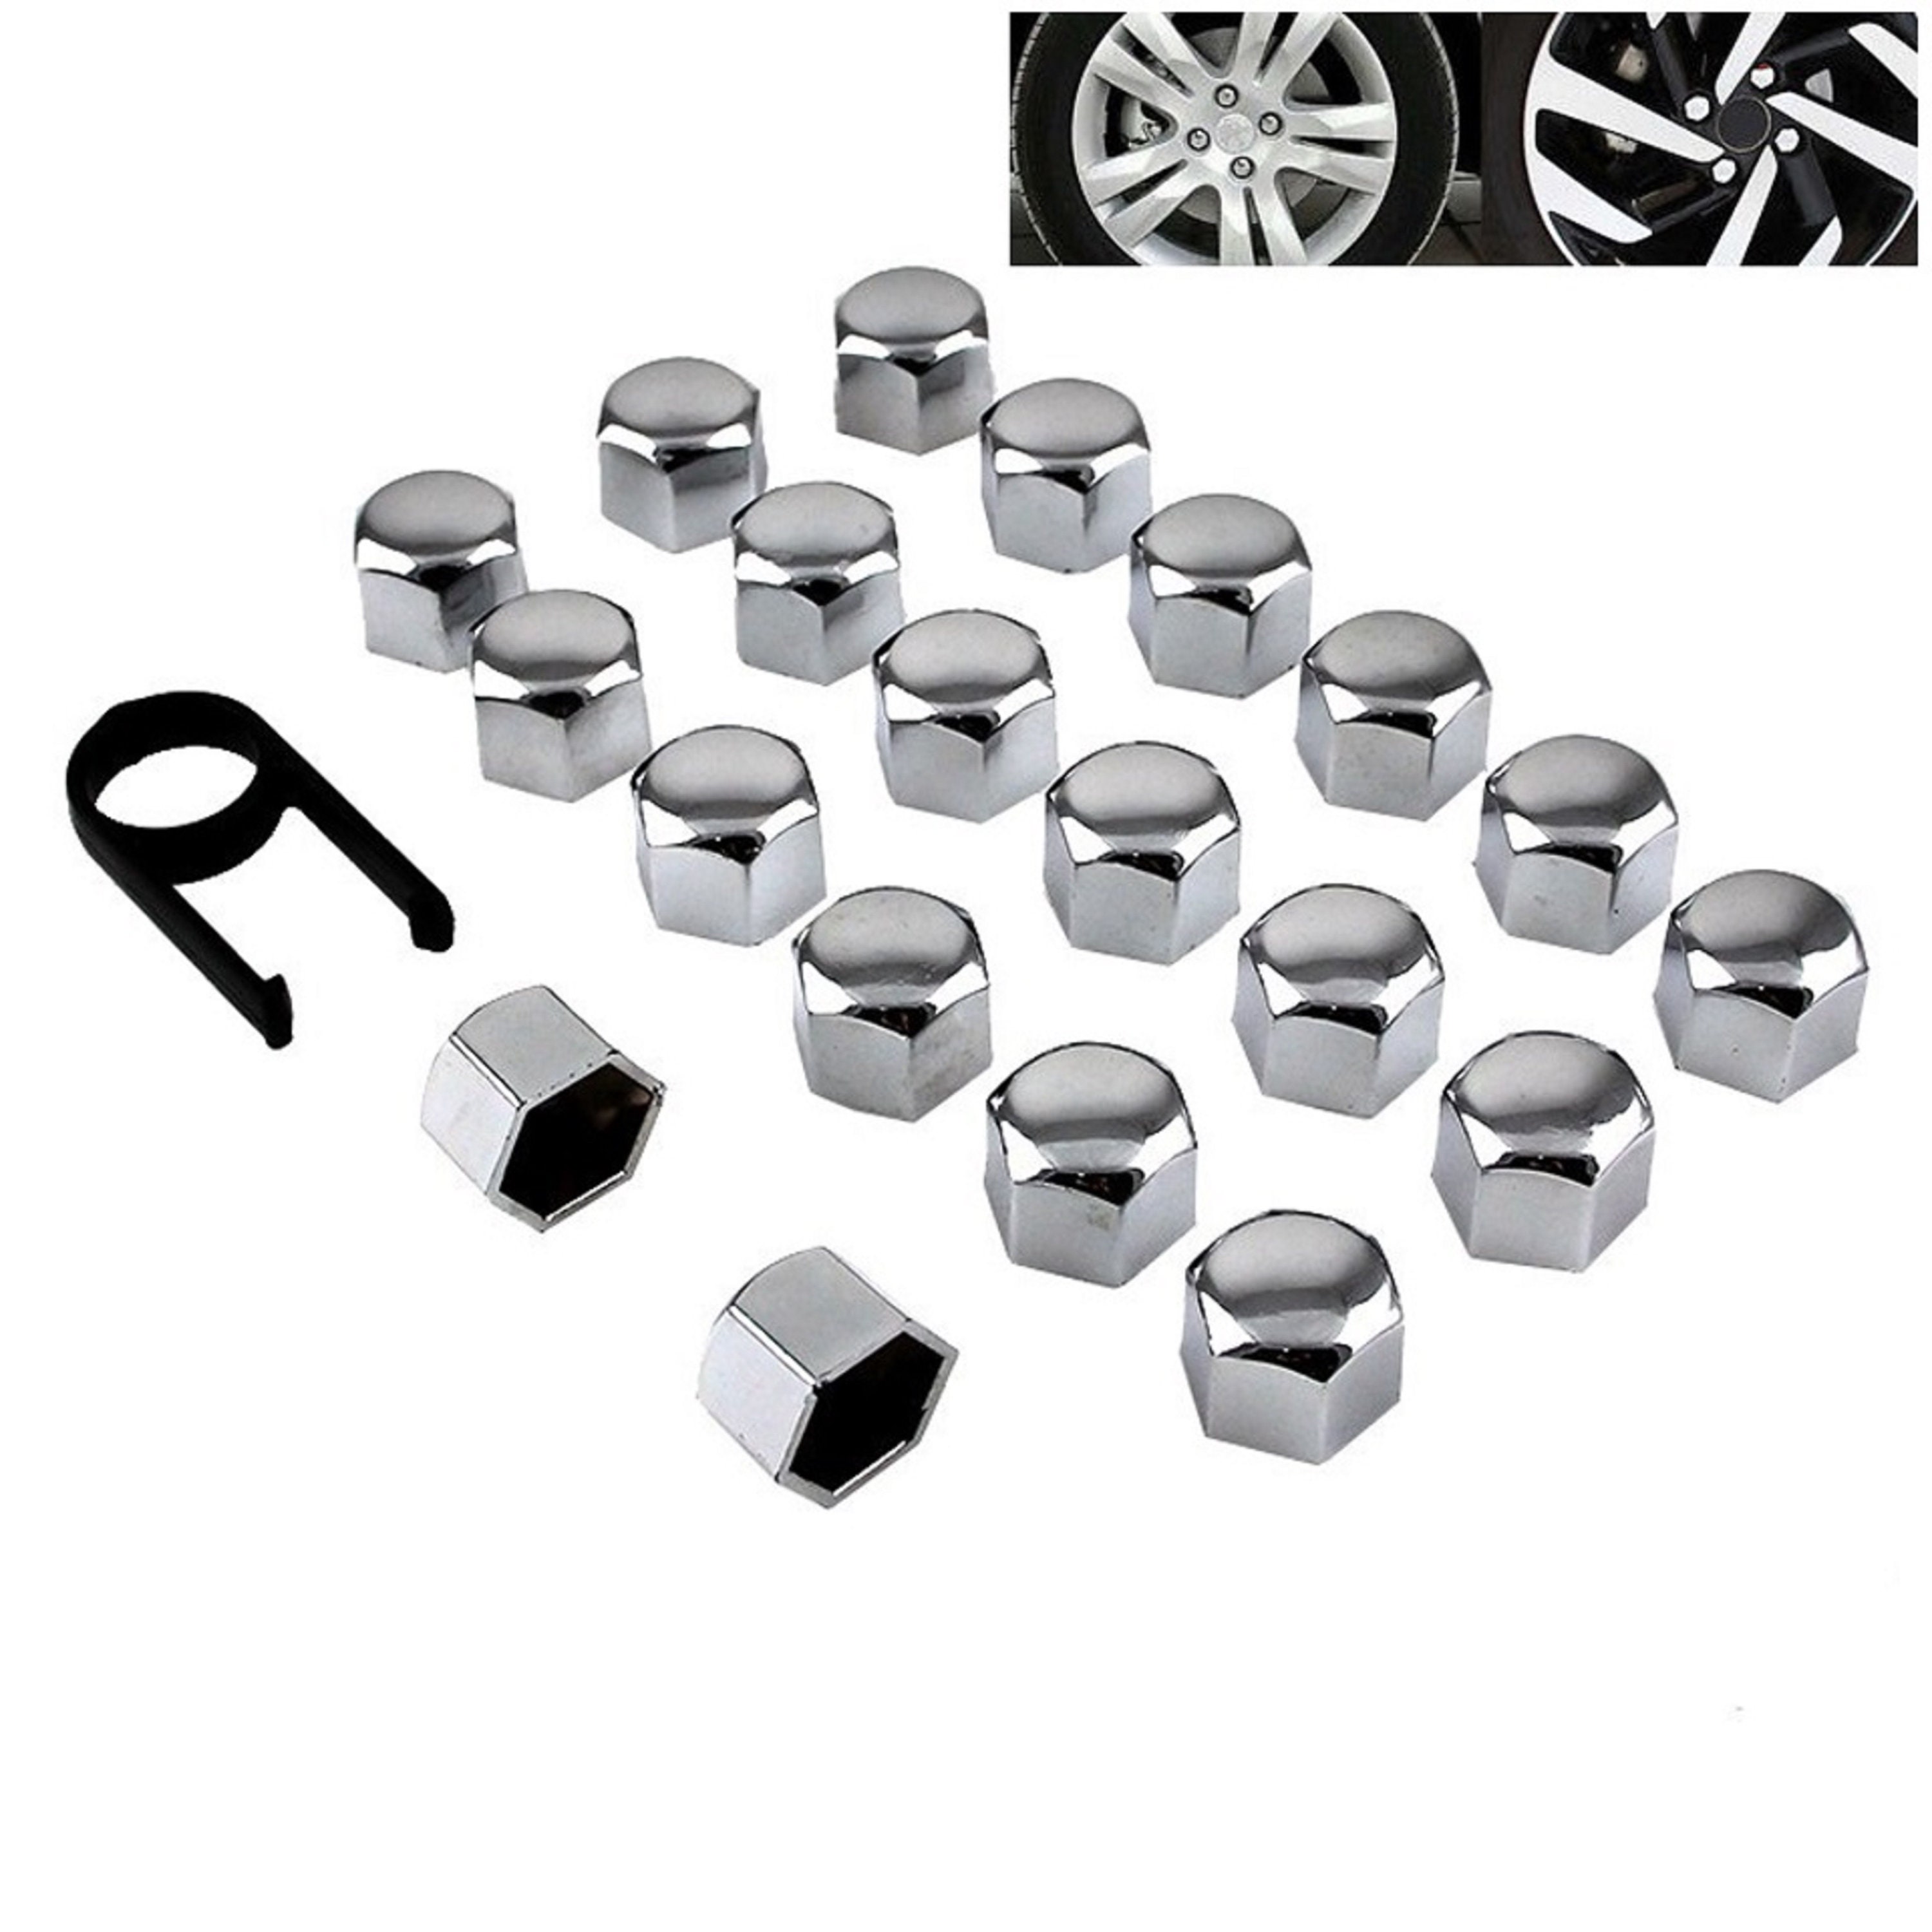 19 mm 20 Pieces Wheel Nut Cap Universal Tyre Nut Covers with Removal Tool Set for Cars Black 